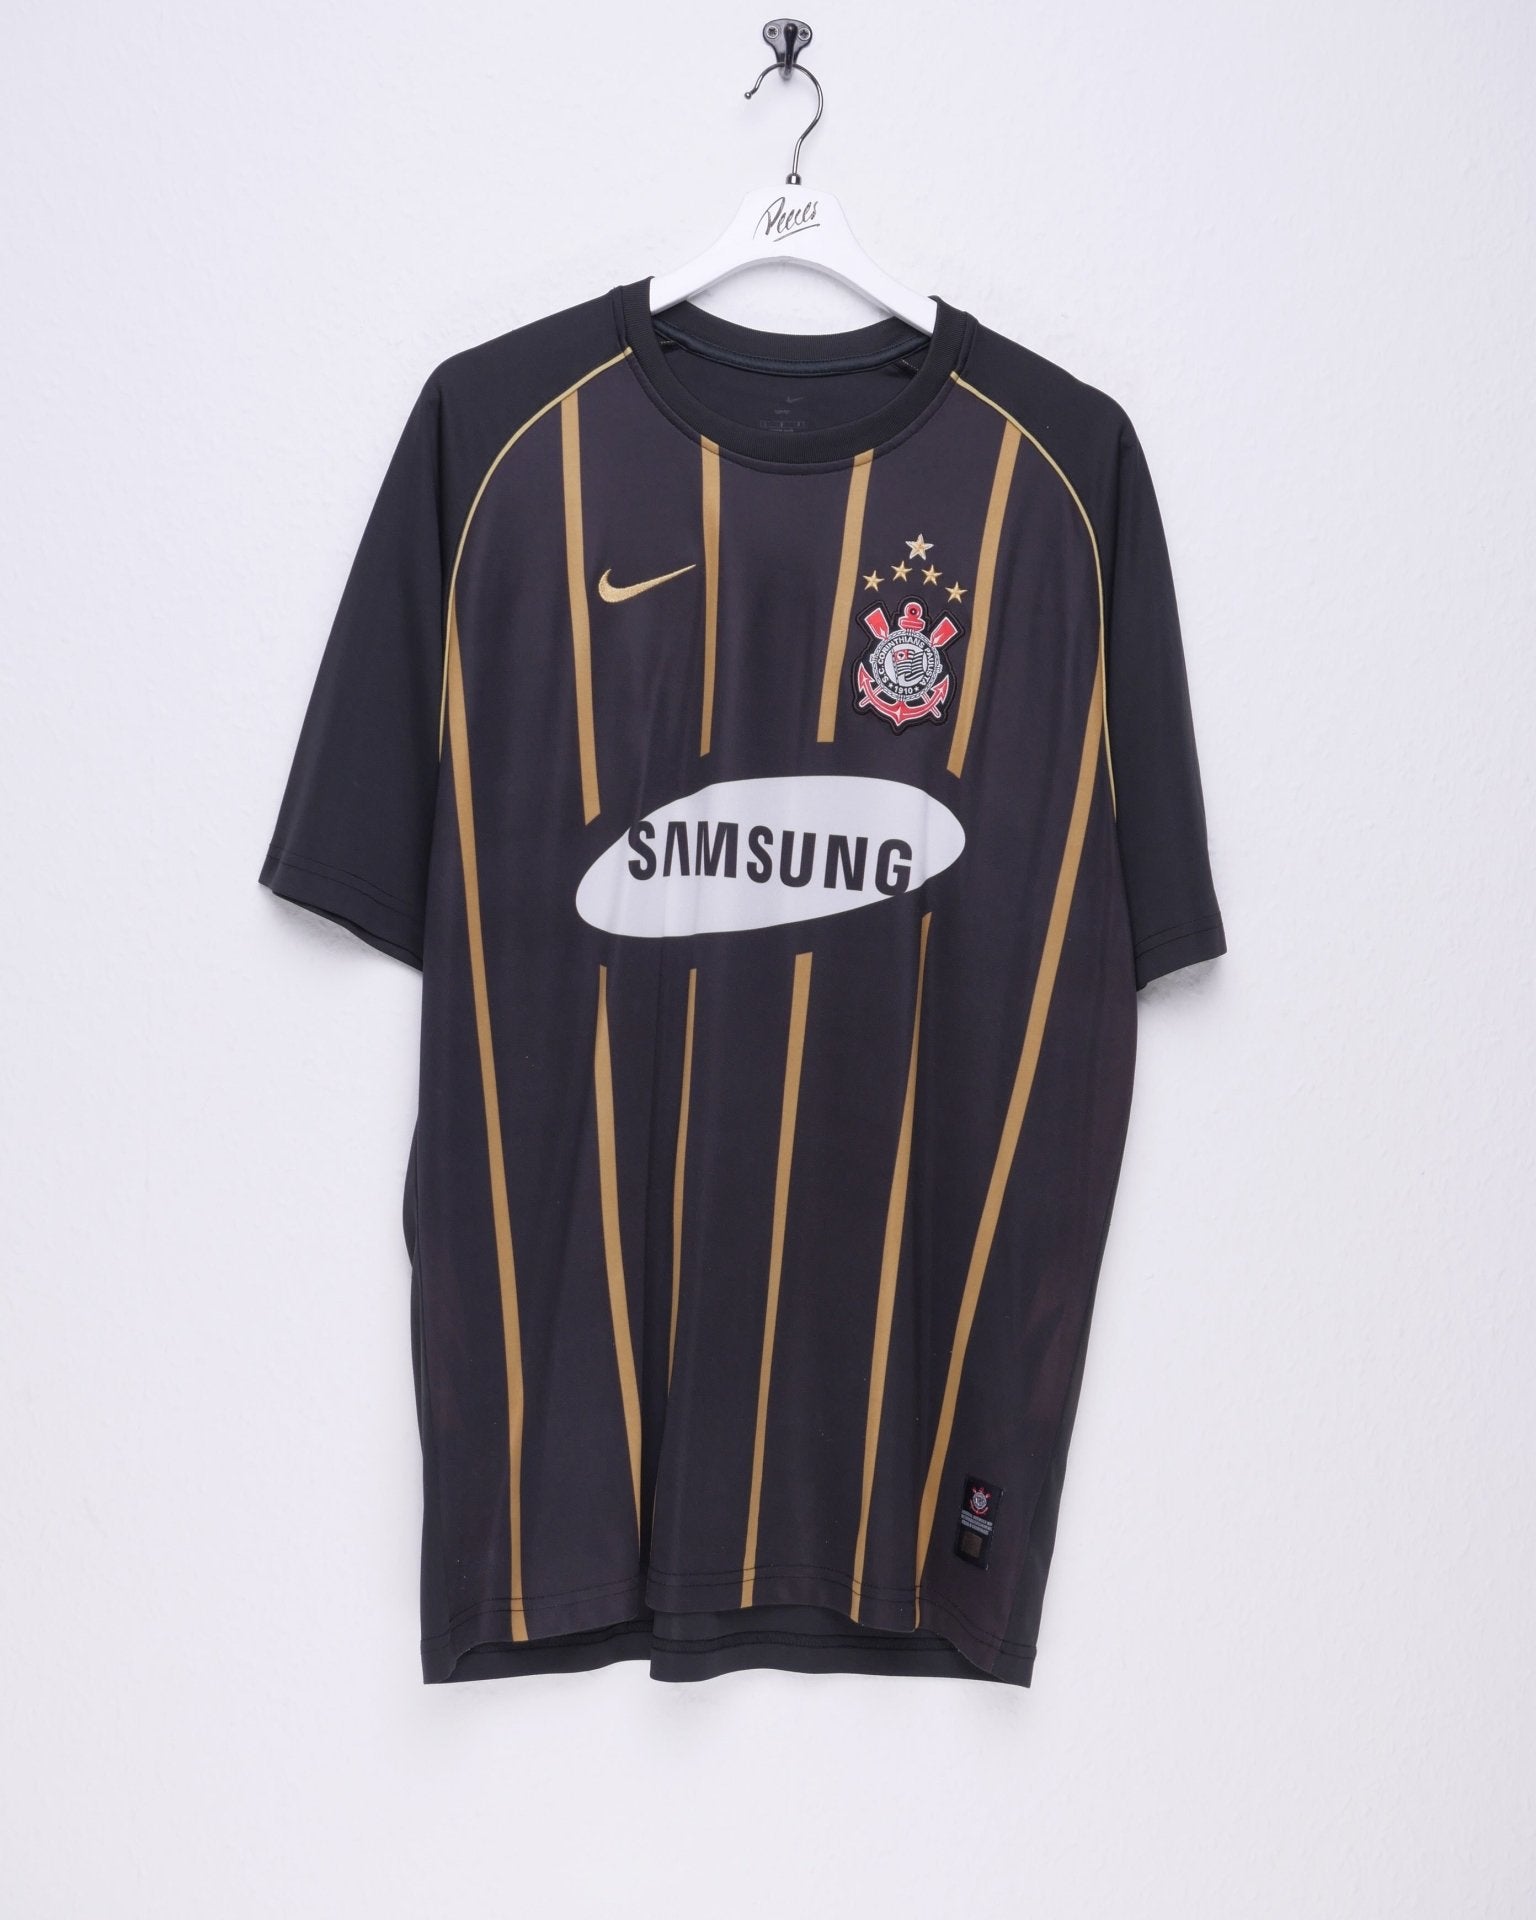 nike embroidered Logo black/gold Soccer Jersey Shirt - Peeces